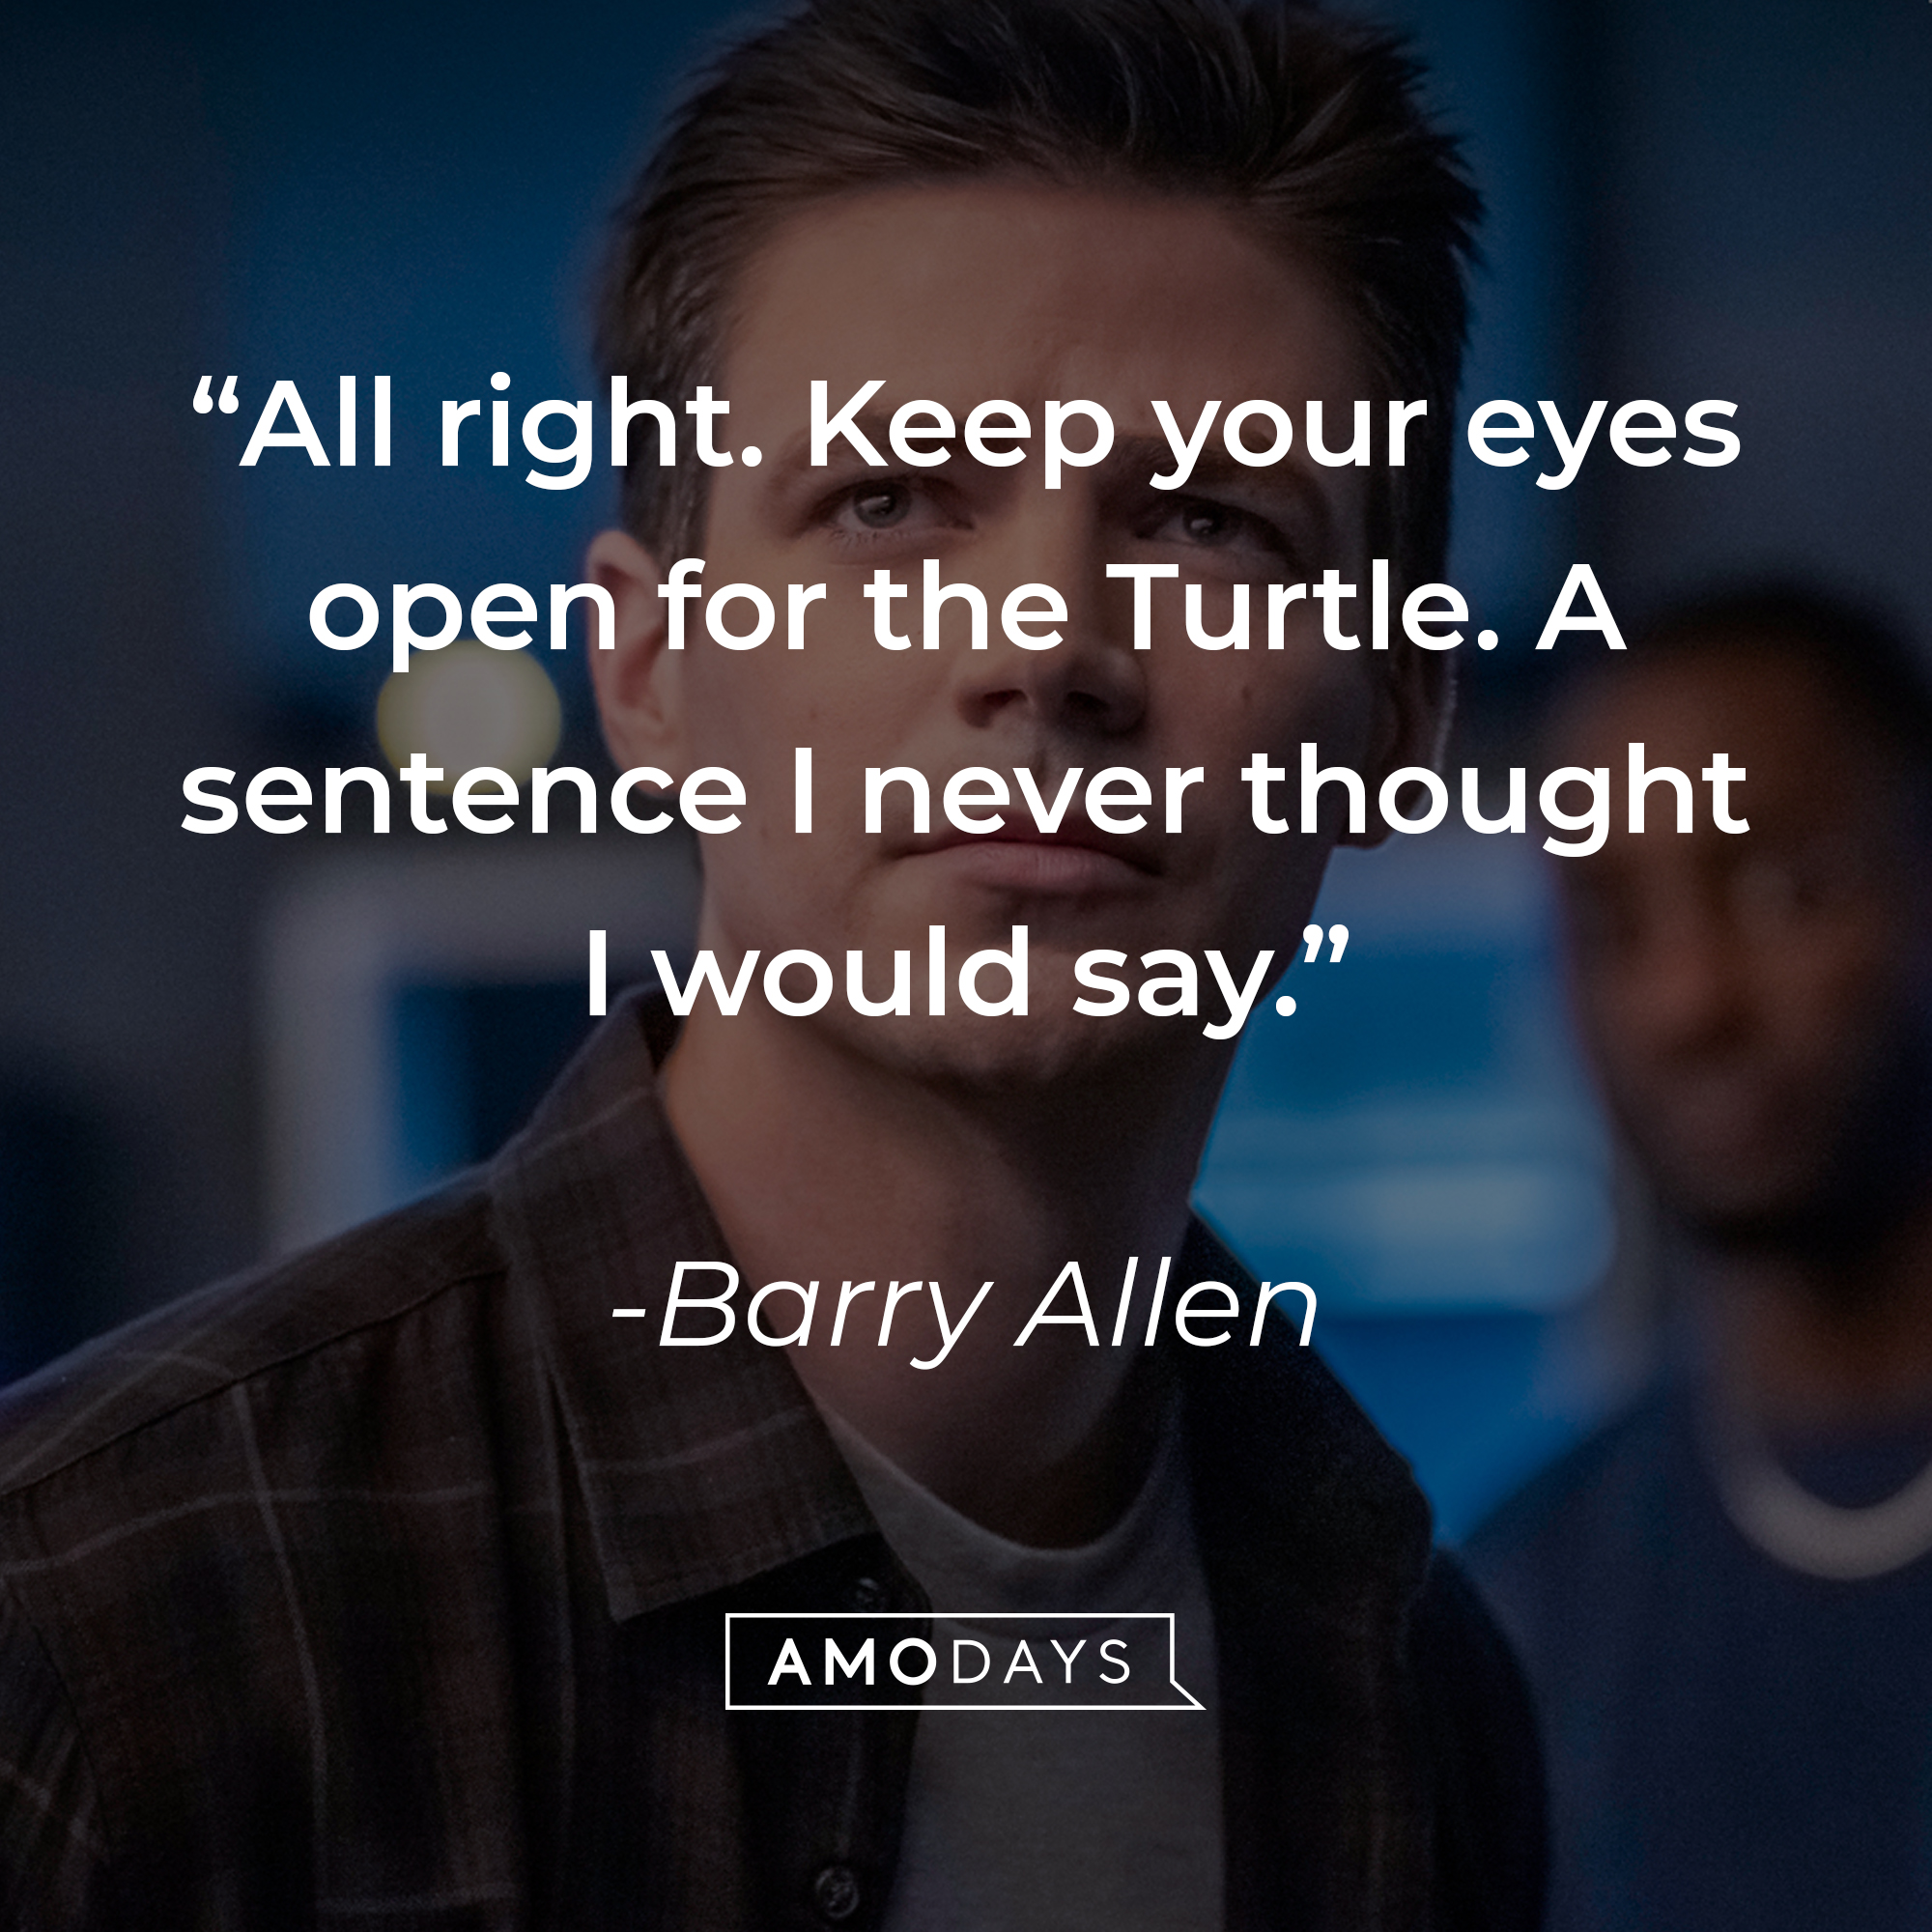 Barry Allen with his quote, "All right. Keep your eyes open for the Turtle. A sentence I never thought I would say." | Source: Facebook/CWTheFlash